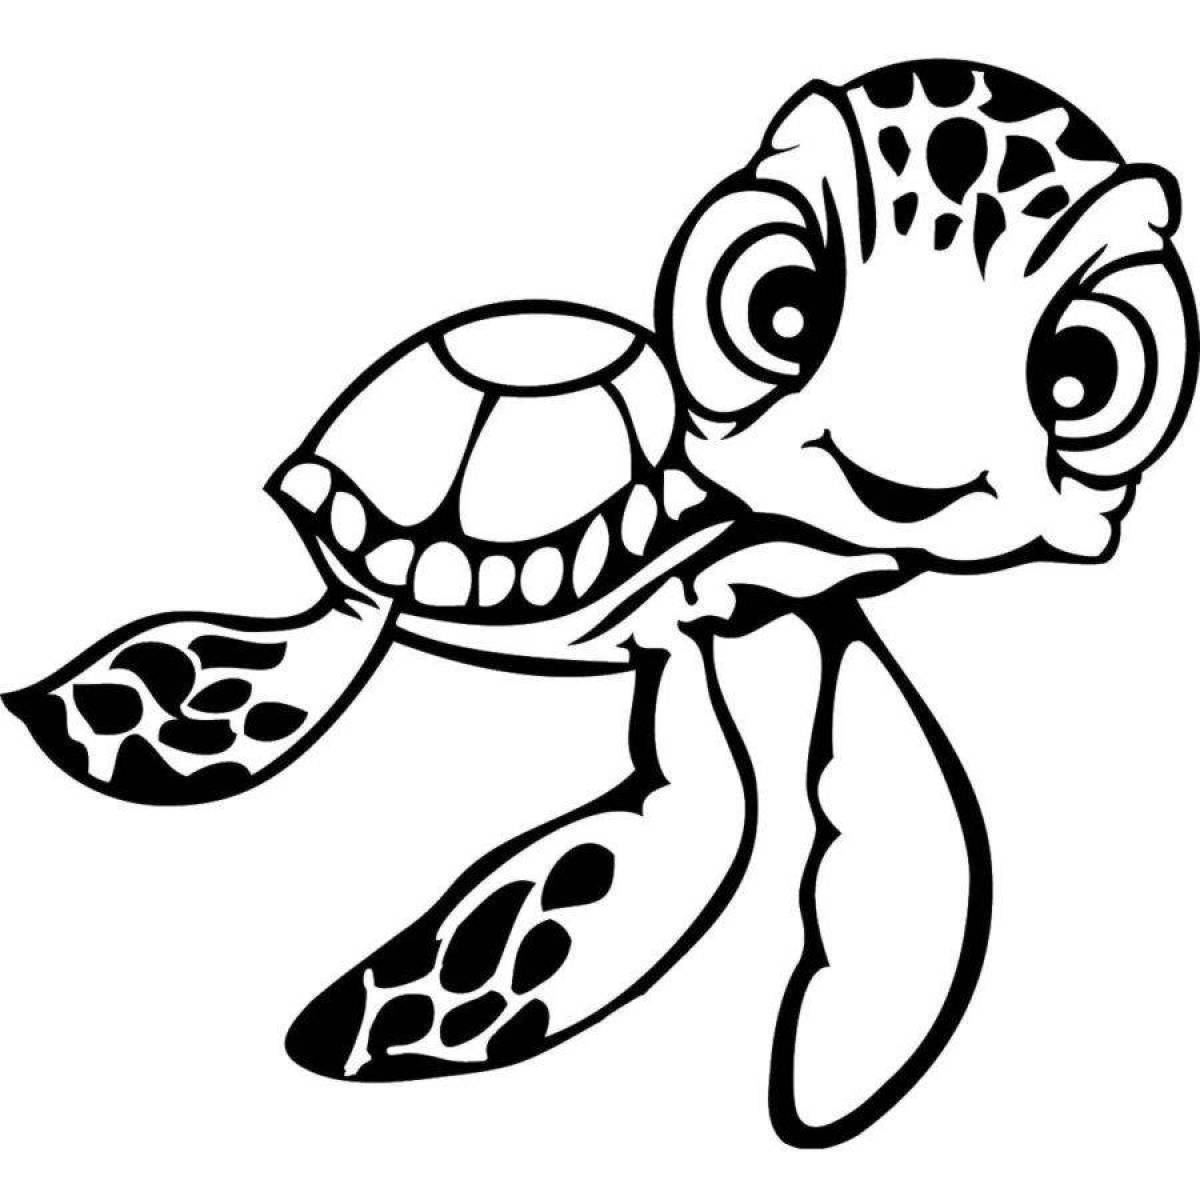 Colorful turtle coloring page